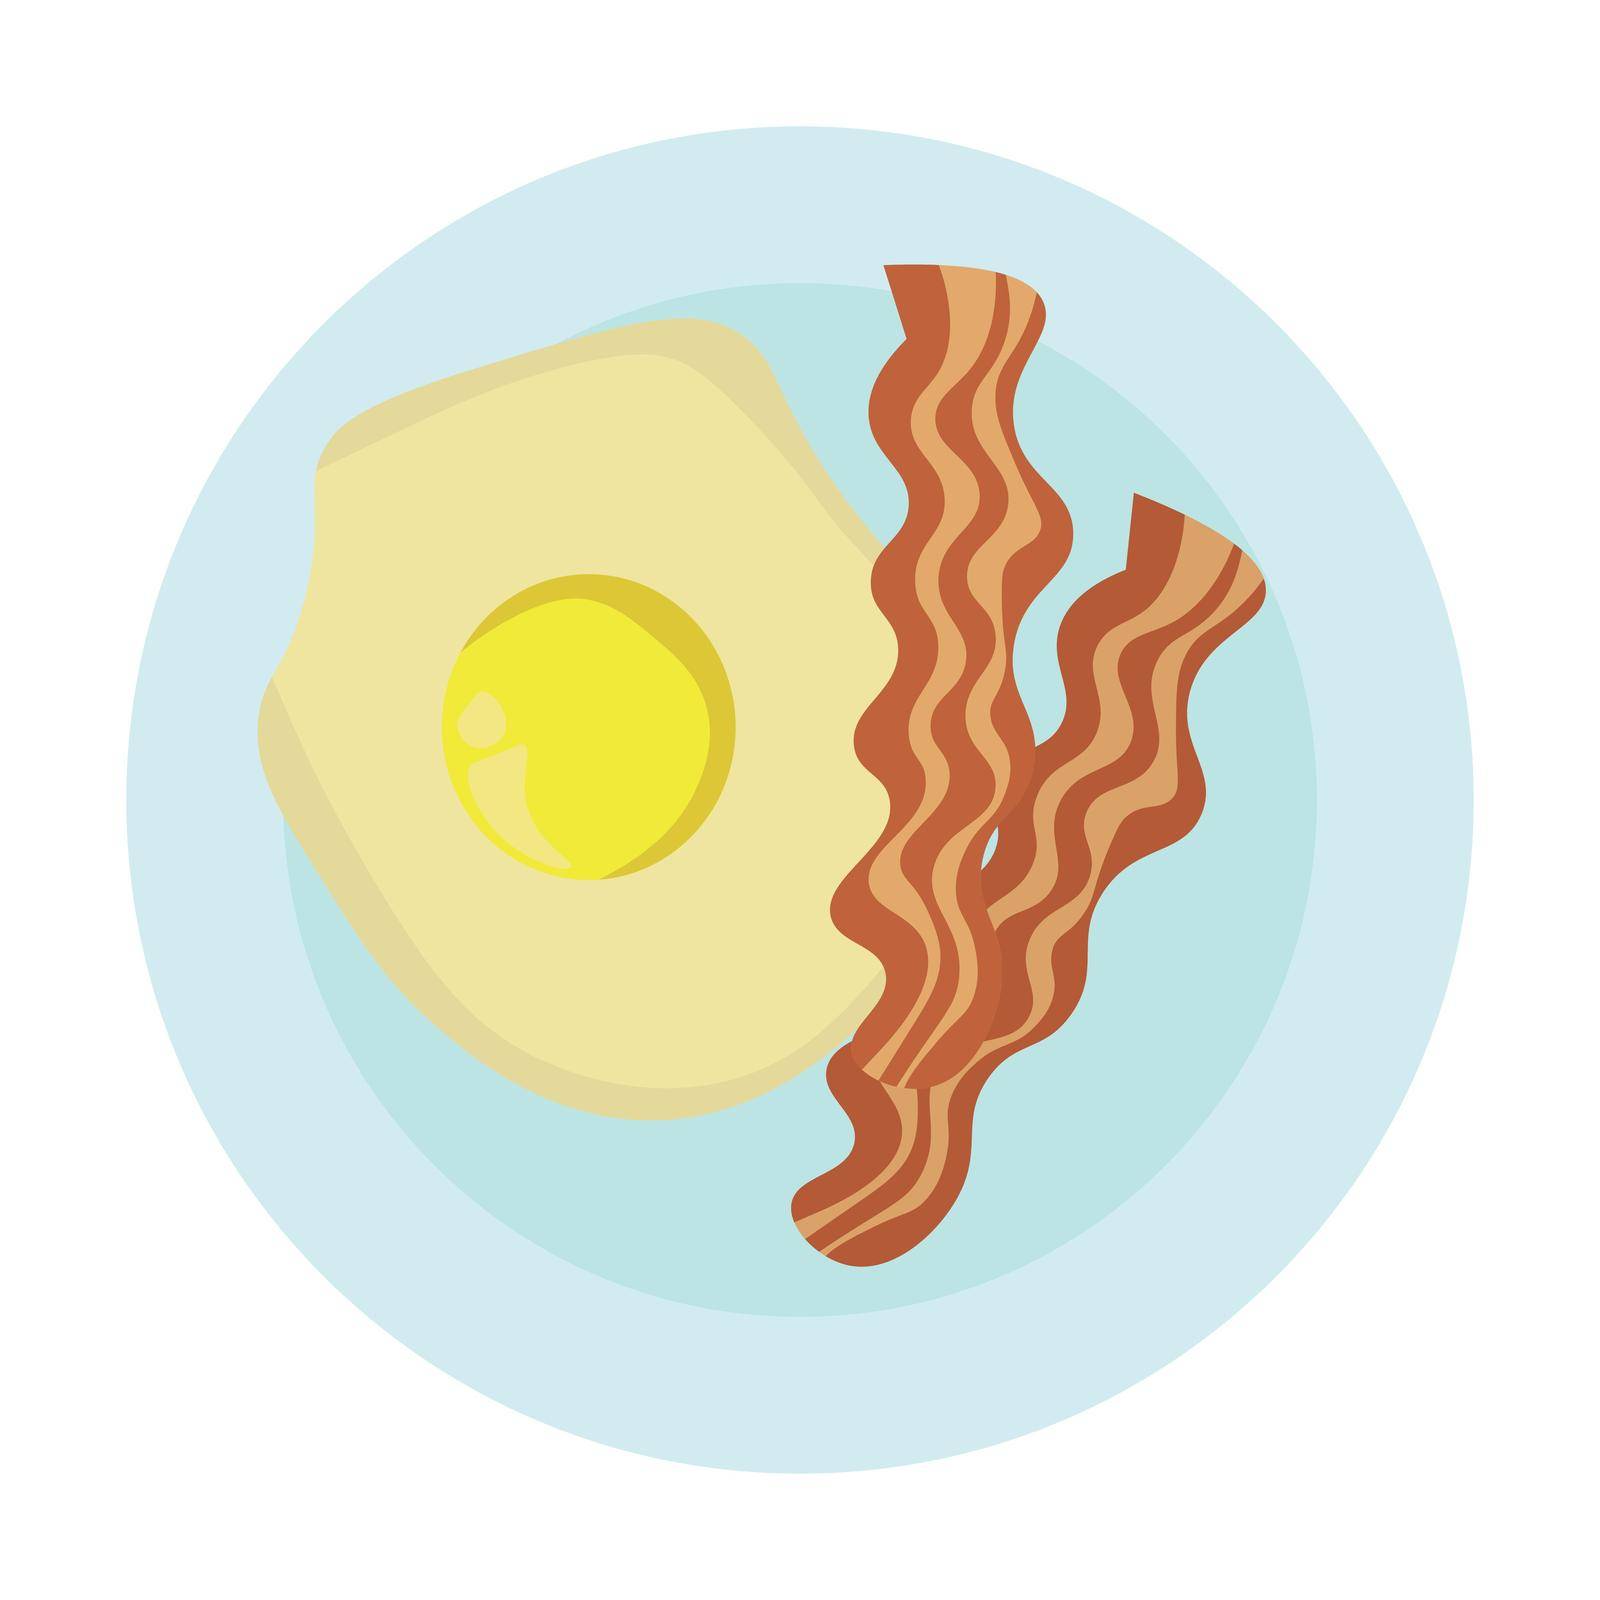 Fried eggs and bacon on a plate, a popular breakfast vector illustration